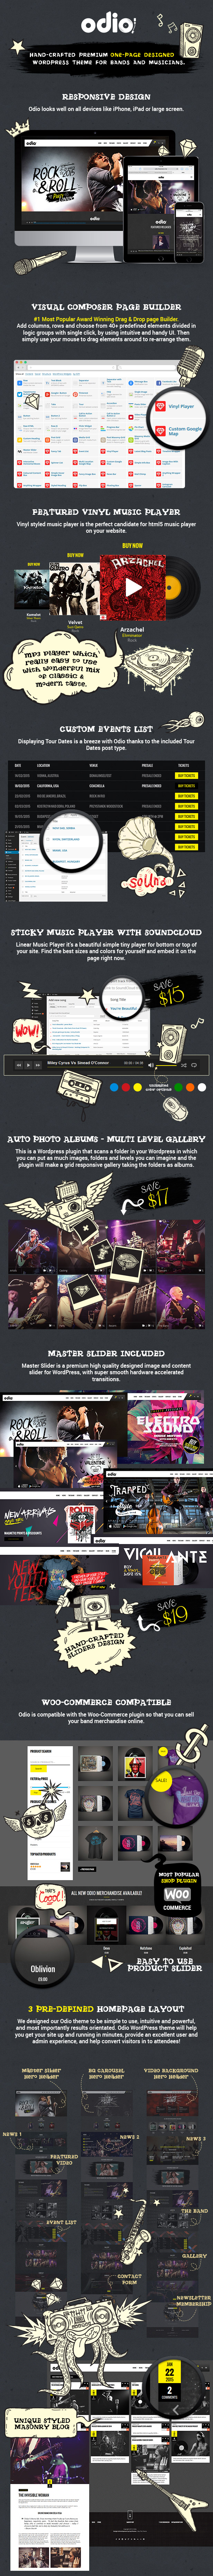 Odio - Music WP Theme For Bands, Clubs, and Musicians - 1